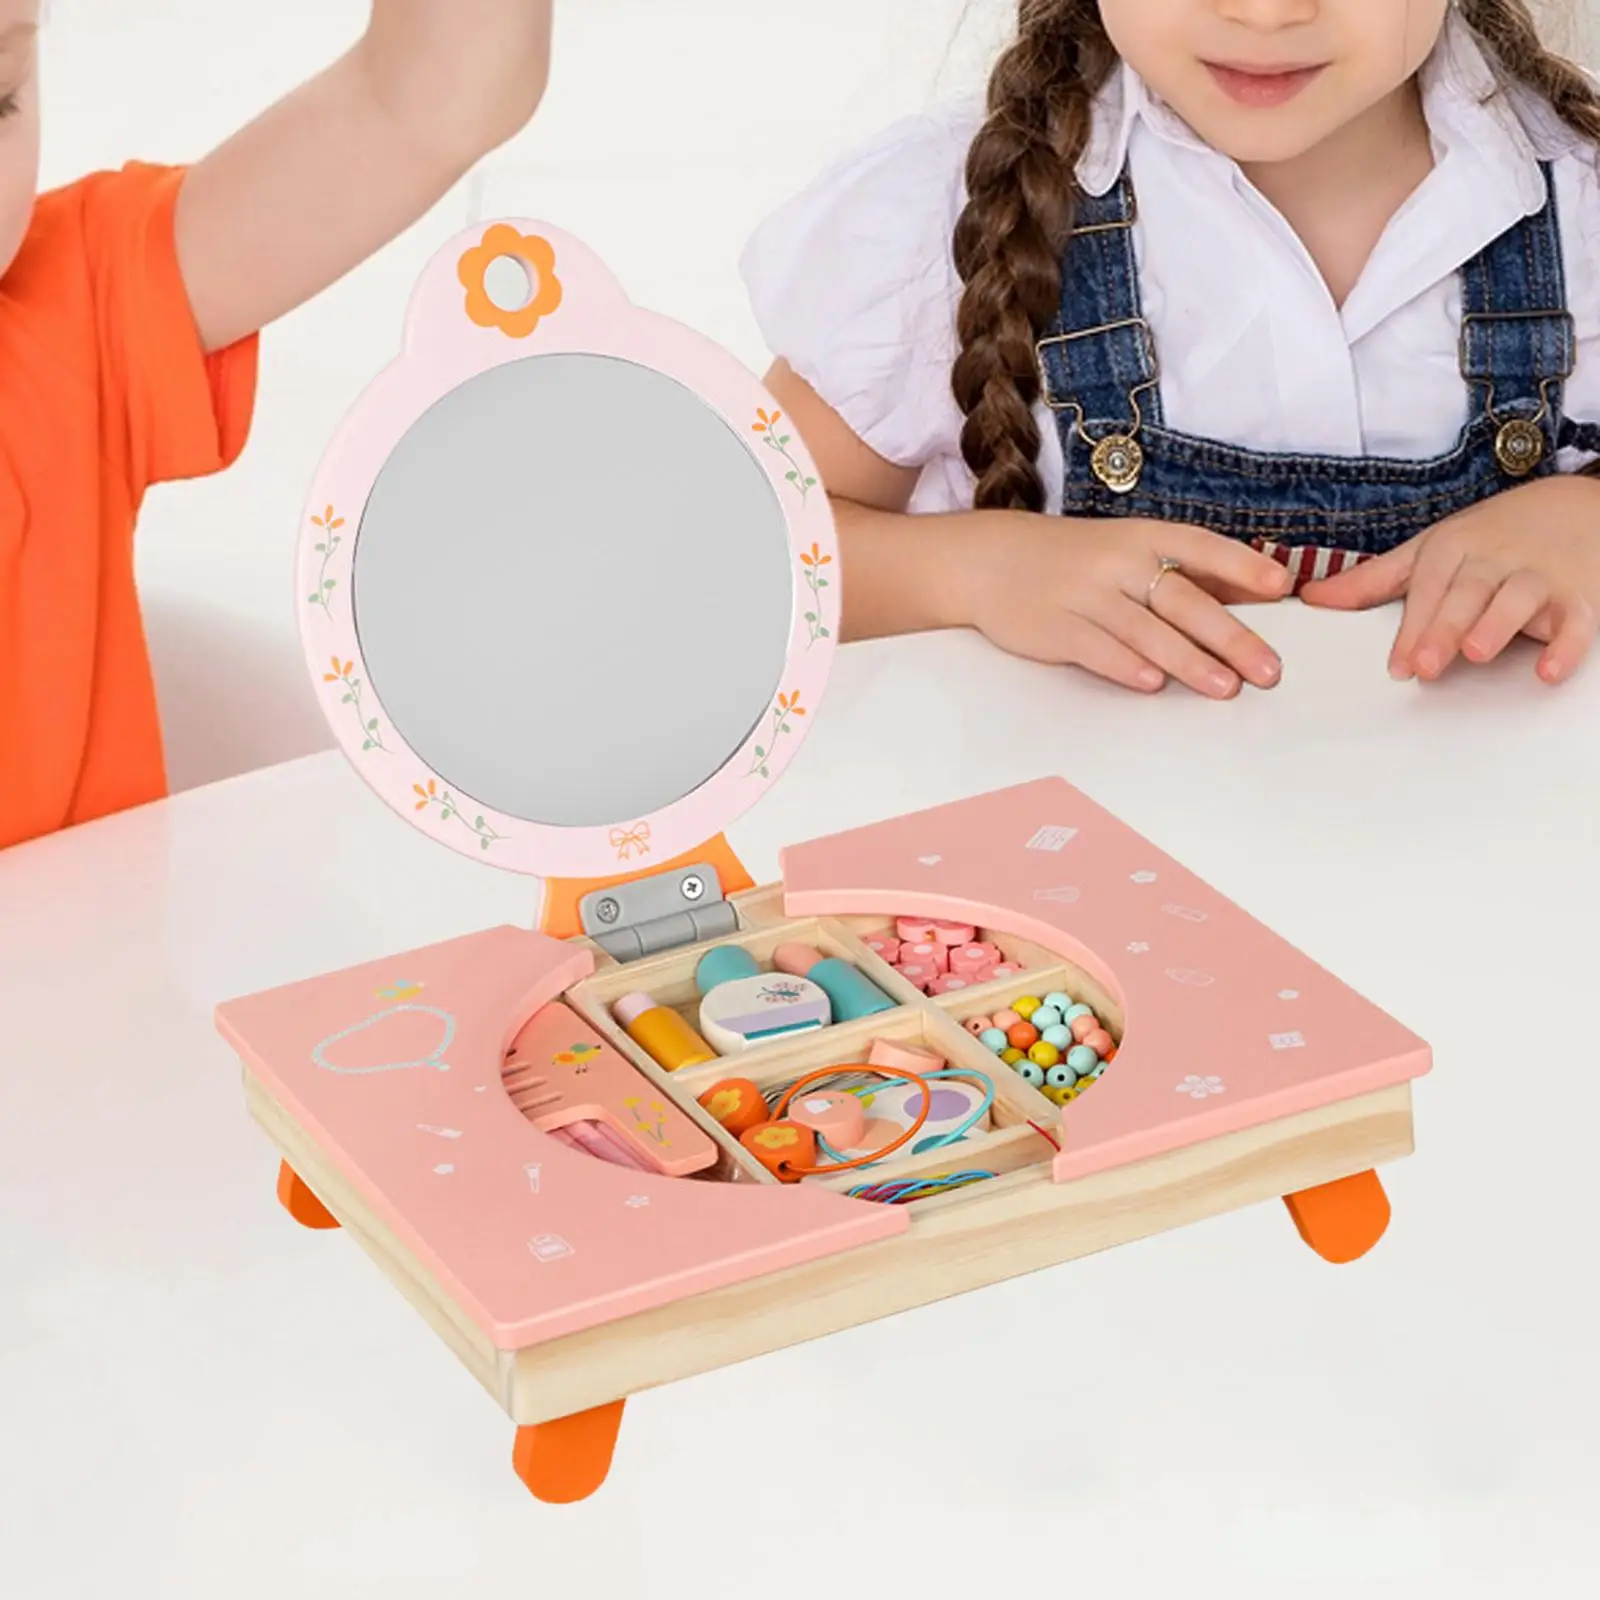 Tabletop Pretend Play Vanity Toy Girls Toys for Dress up Learning Activity Toy Tabletop Dresser Makeup Toy for Kids Girls